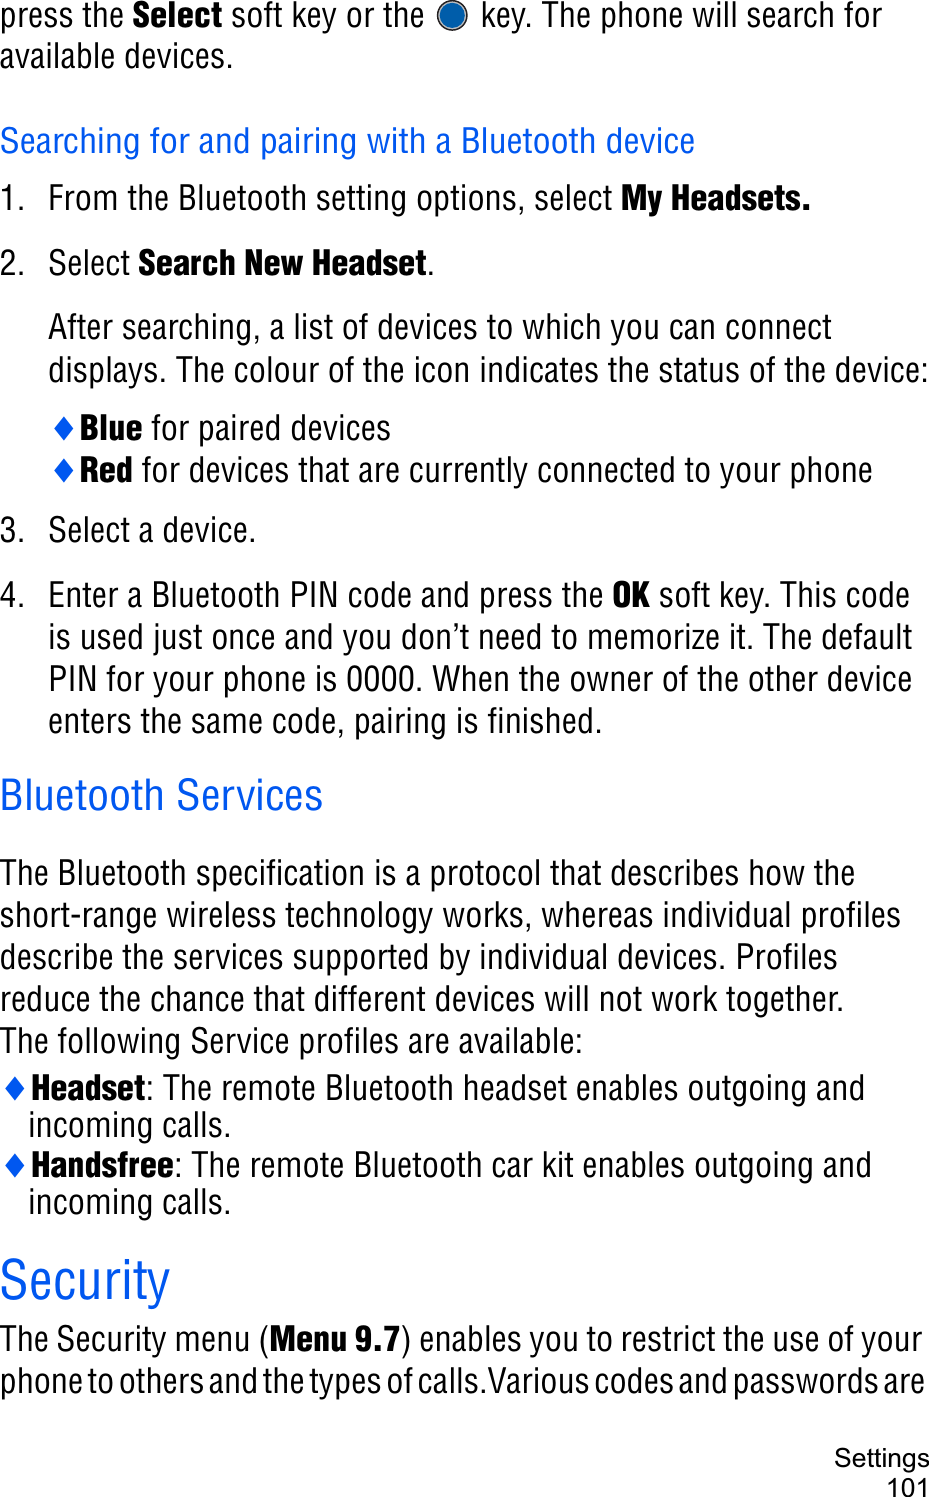 Settings101press the Select soft key or the   key. The phone will search for available devices.Searching for and pairing with a Bluetooth device1. From the Bluetooth setting options, select My Headsets.2. Select Search New Headset.After searching, a list of devices to which you can connect displays. The colour of the icon indicates the status of the device:iBlue for paired devicesiRed for devices that are currently connected to your phone3. Select a device.4. Enter a Bluetooth PIN code and press the OK soft key. This code is used just once and you don’t need to memorize it. The default PIN for your phone is 0000. When the owner of the other device enters the same code, pairing is finished.Bluetooth ServicesThe Bluetooth specification is a protocol that describes how the short-range wireless technology works, whereas individual profiles describe the services supported by individual devices. Profiles reduce the chance that different devices will not work together.The following Service profiles are available: iHeadset: The remote Bluetooth headset enables outgoing and incoming calls.iHandsfree: The remote Bluetooth car kit enables outgoing and incoming calls.SecurityThe Security menu (Menu 9.7) enables you to restrict the use of your phone to others and the types of calls.Various codes and passwords are 